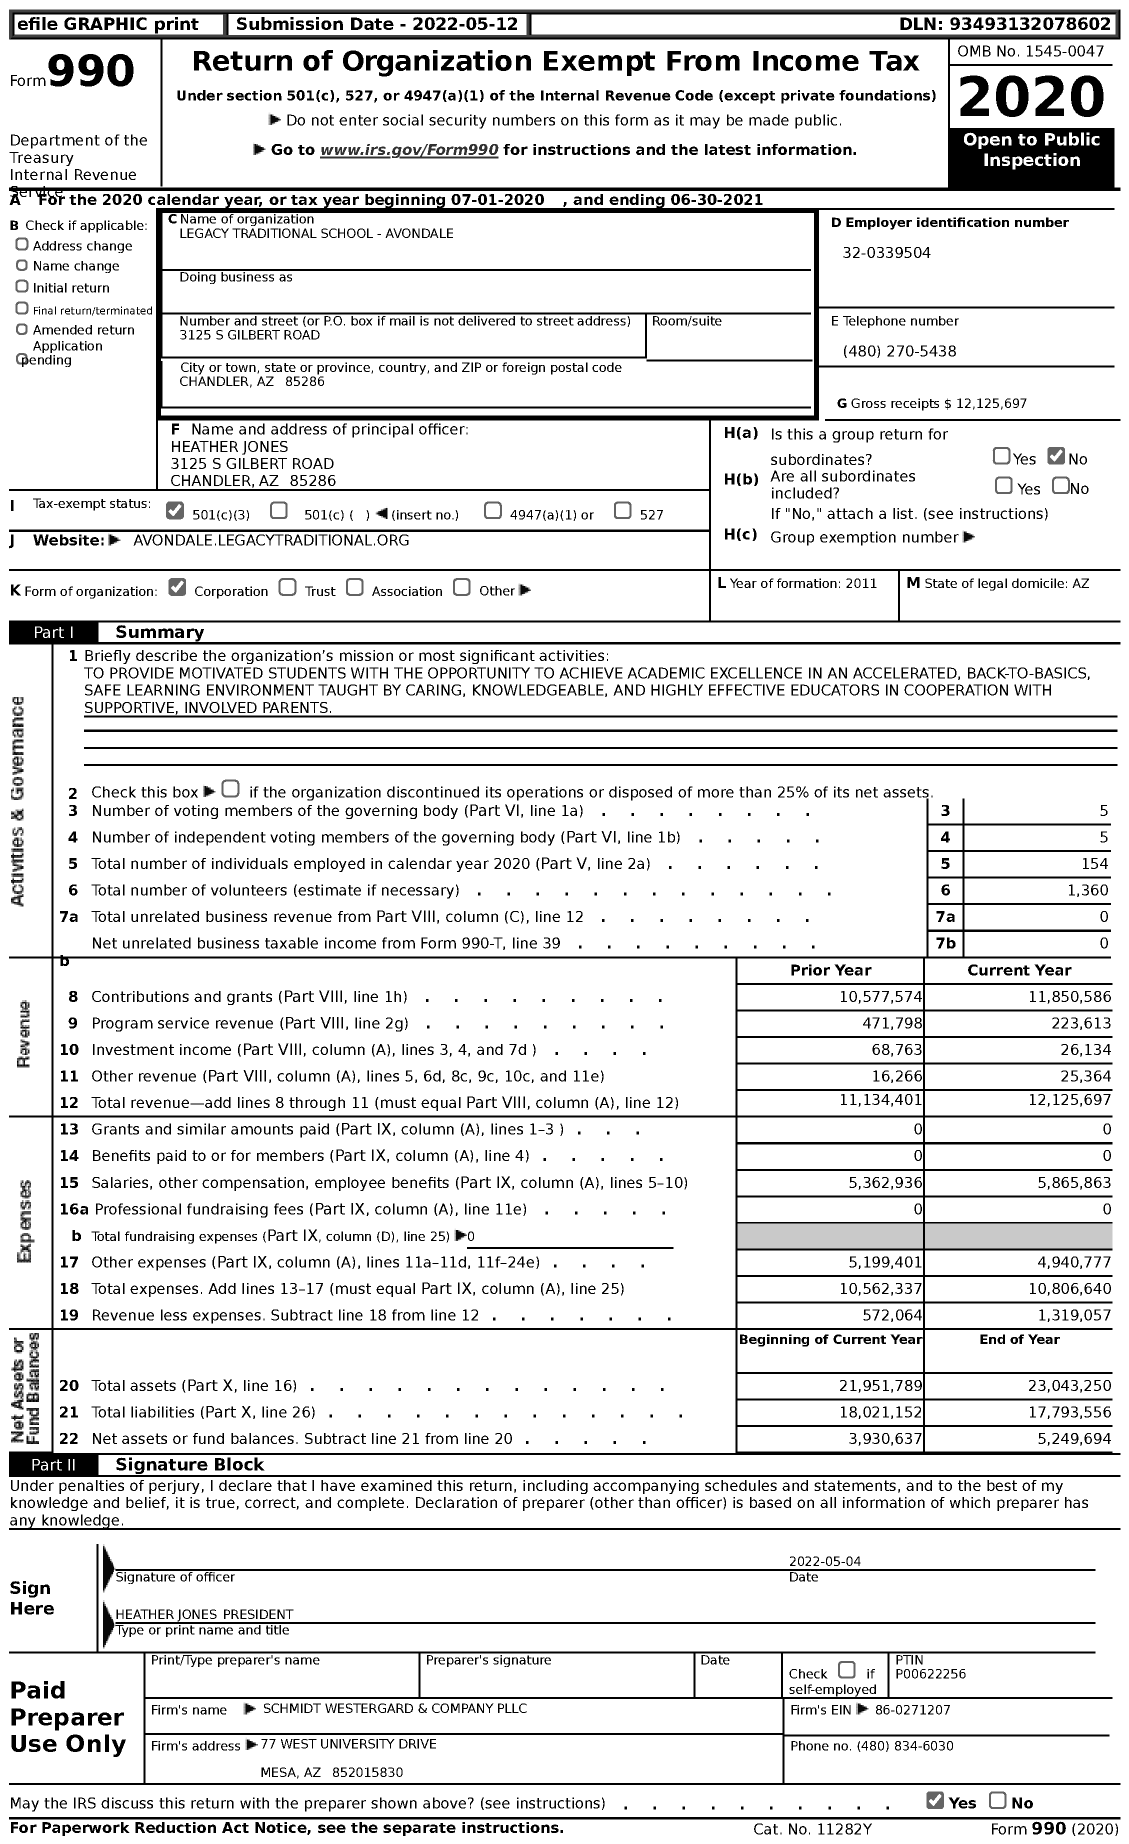 Image of first page of 2020 Form 990 for Legacy Traditional School-Avondale Incorporated (LTS)